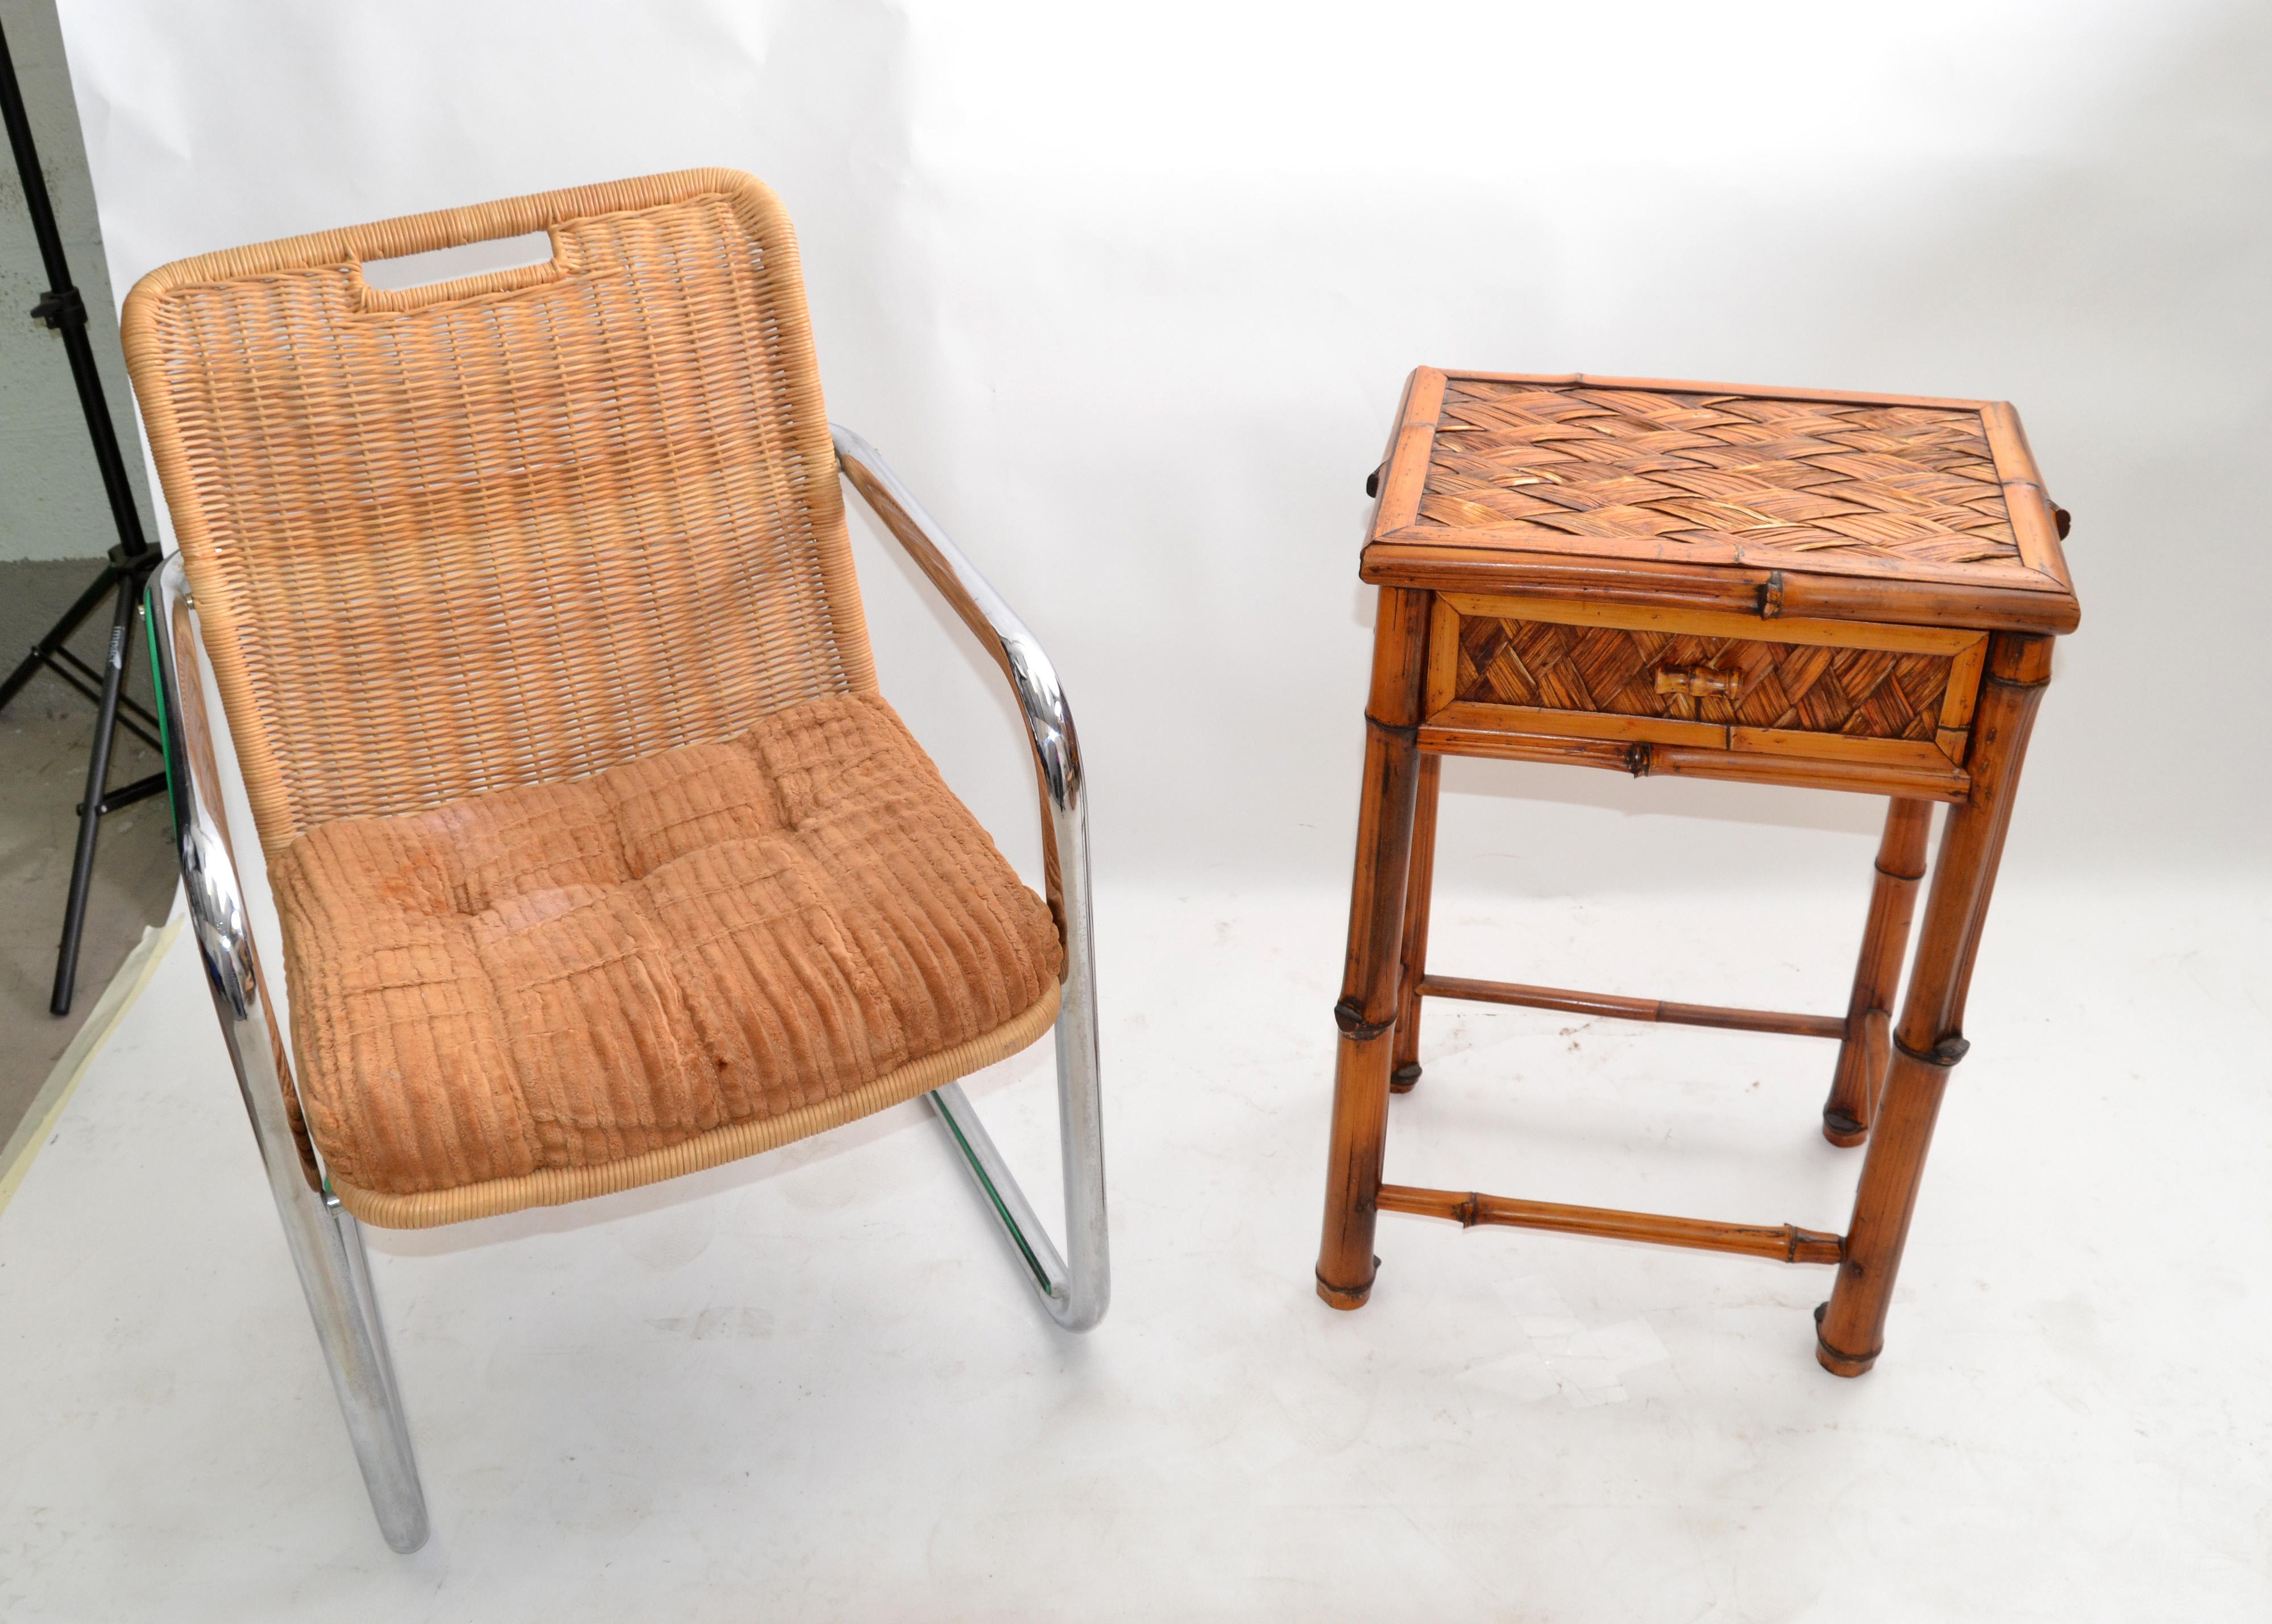 Bohemian Handcrafted Mid-Century Modern Bamboo & Rattan Side Table with Drawer For Sale 2